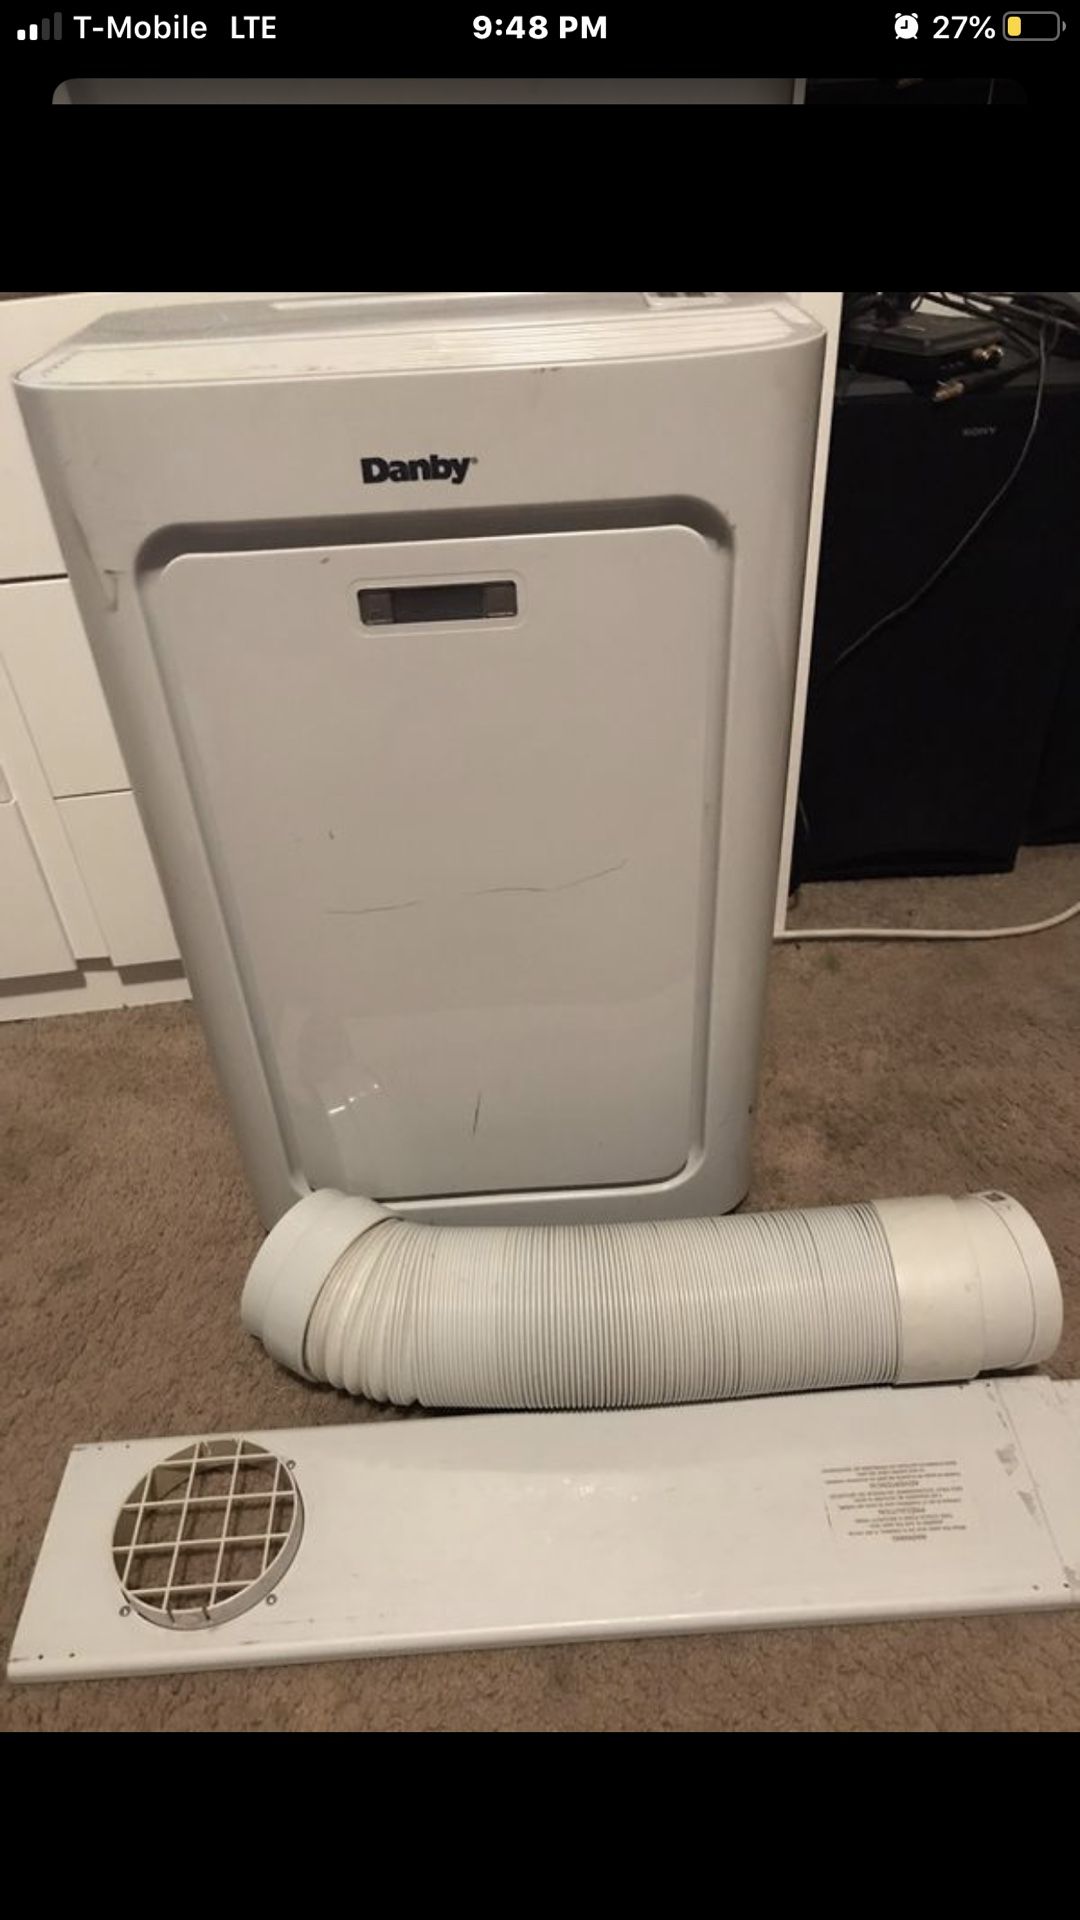 Danby Portable air conditioner in excellent condition comes with remote, and wheels on the bottom to roll around easy